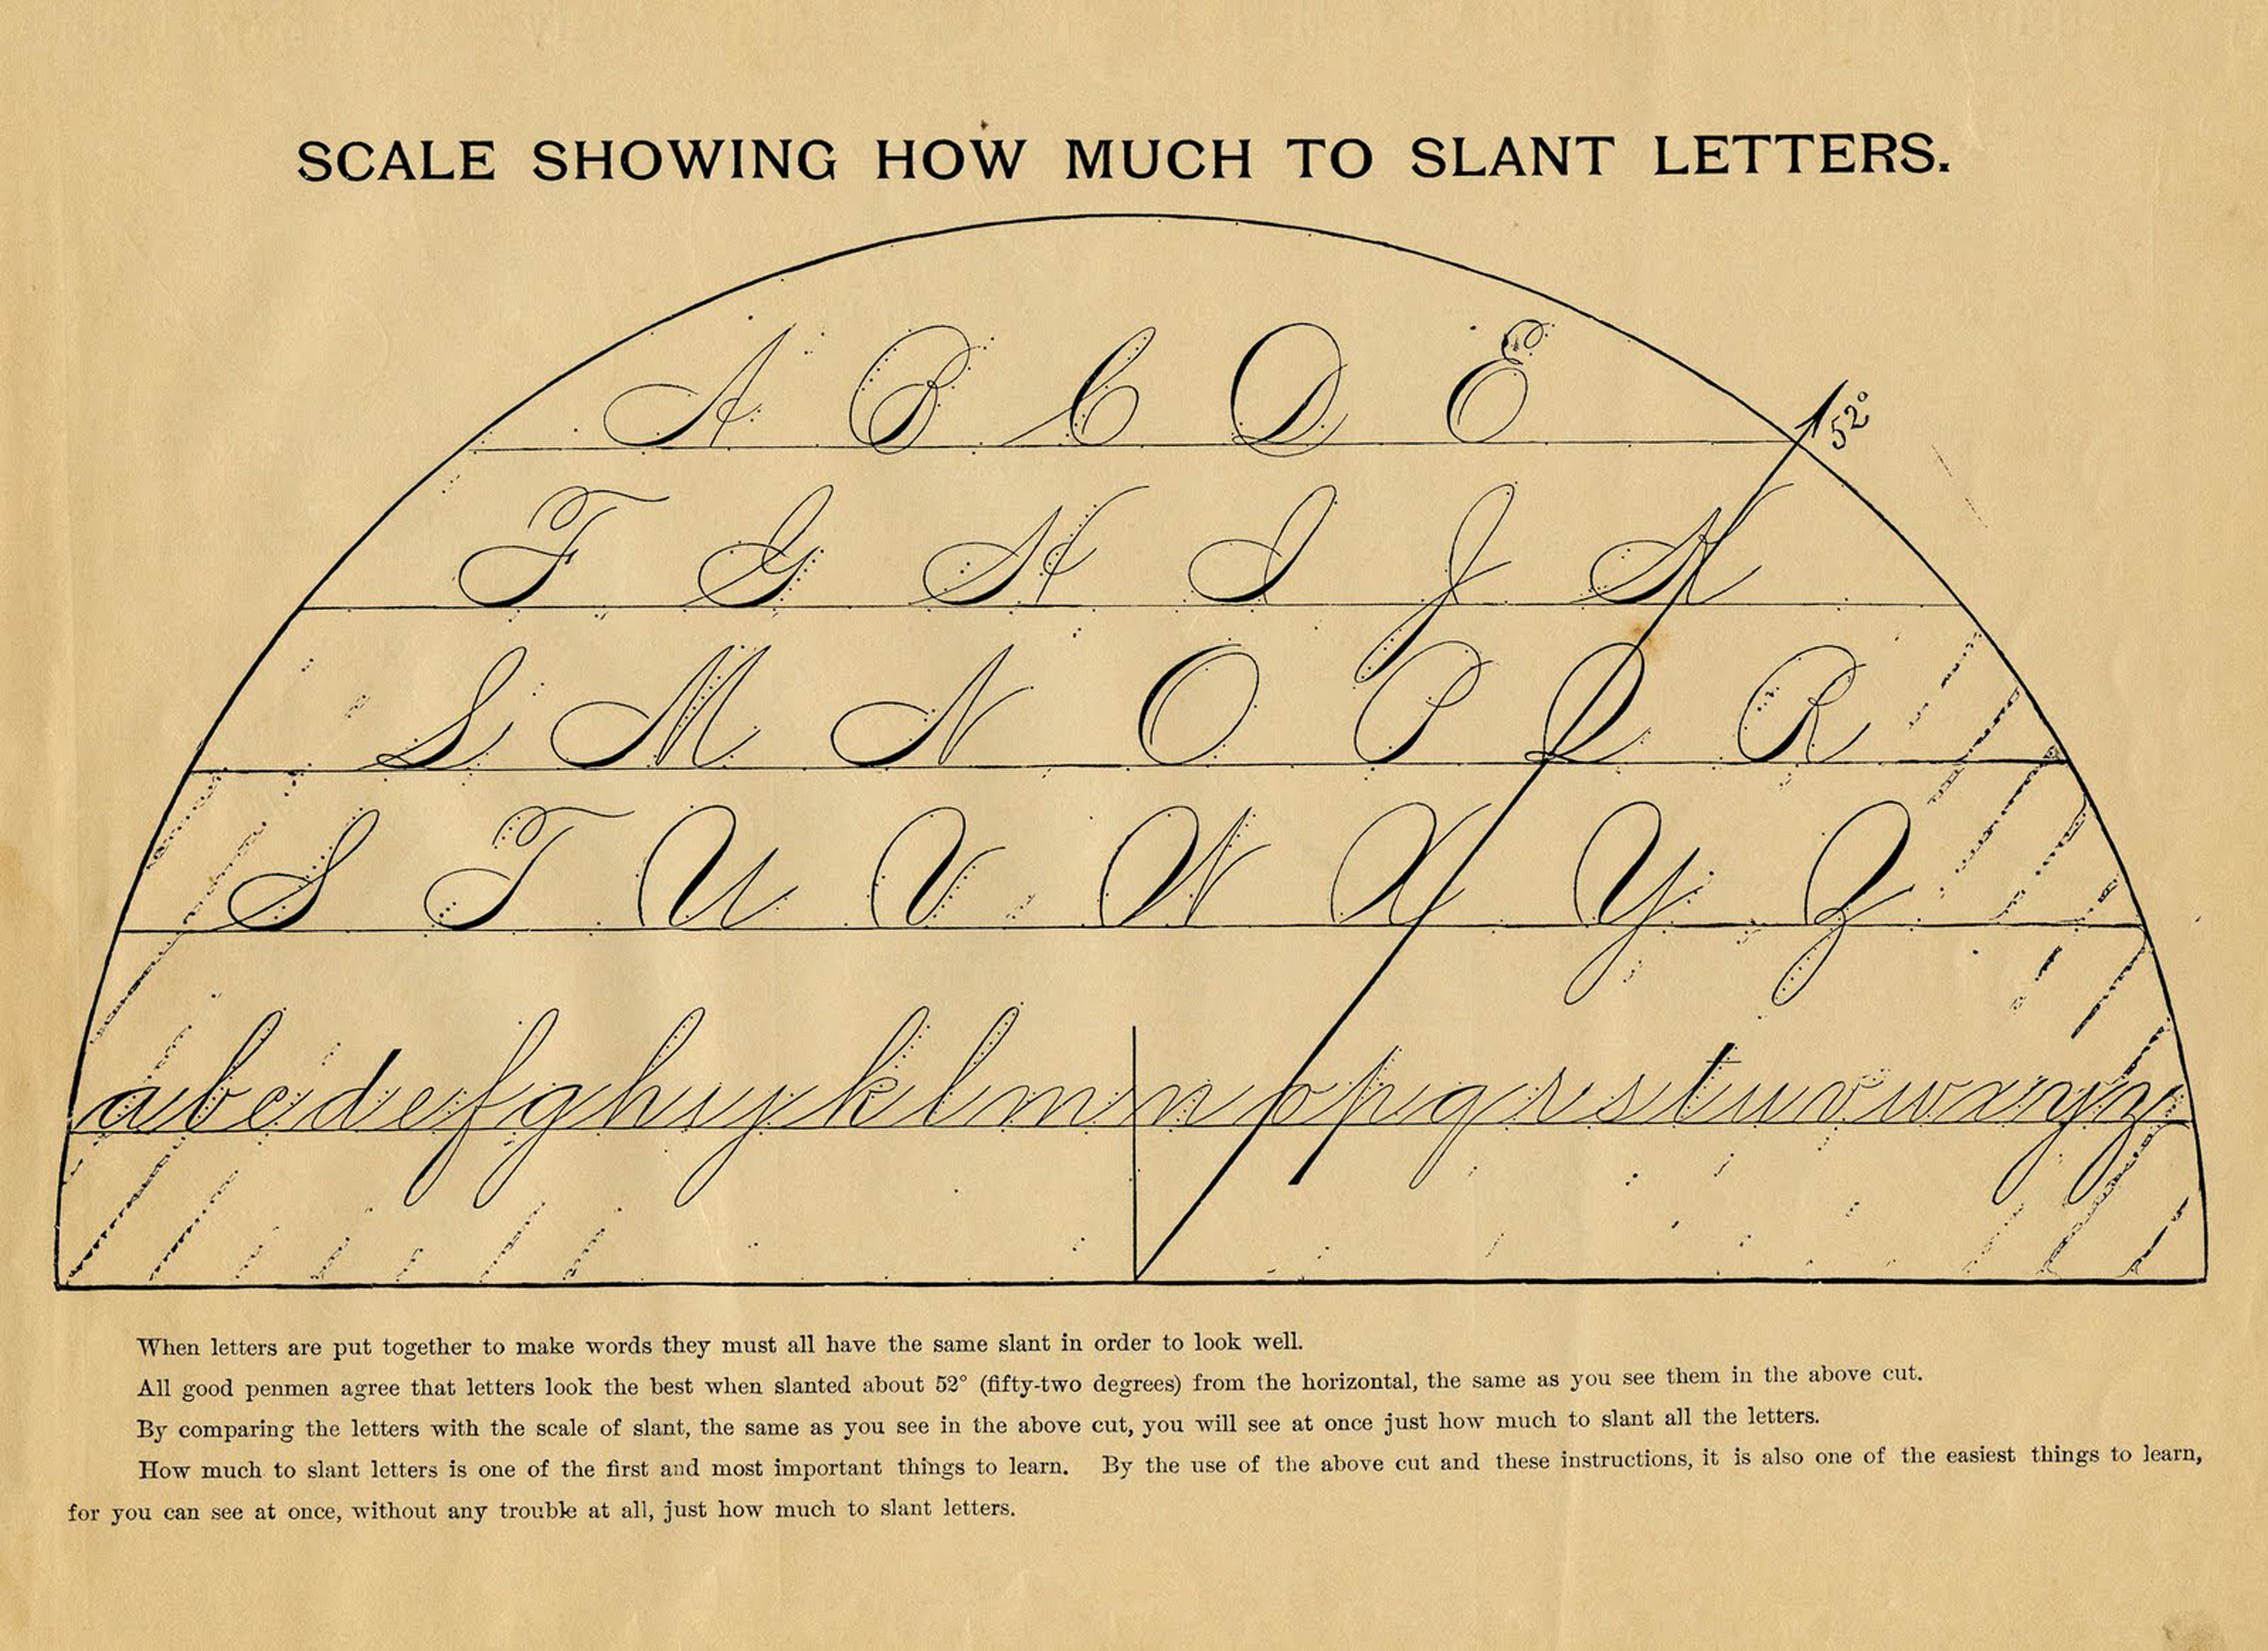 how to slant letters scale